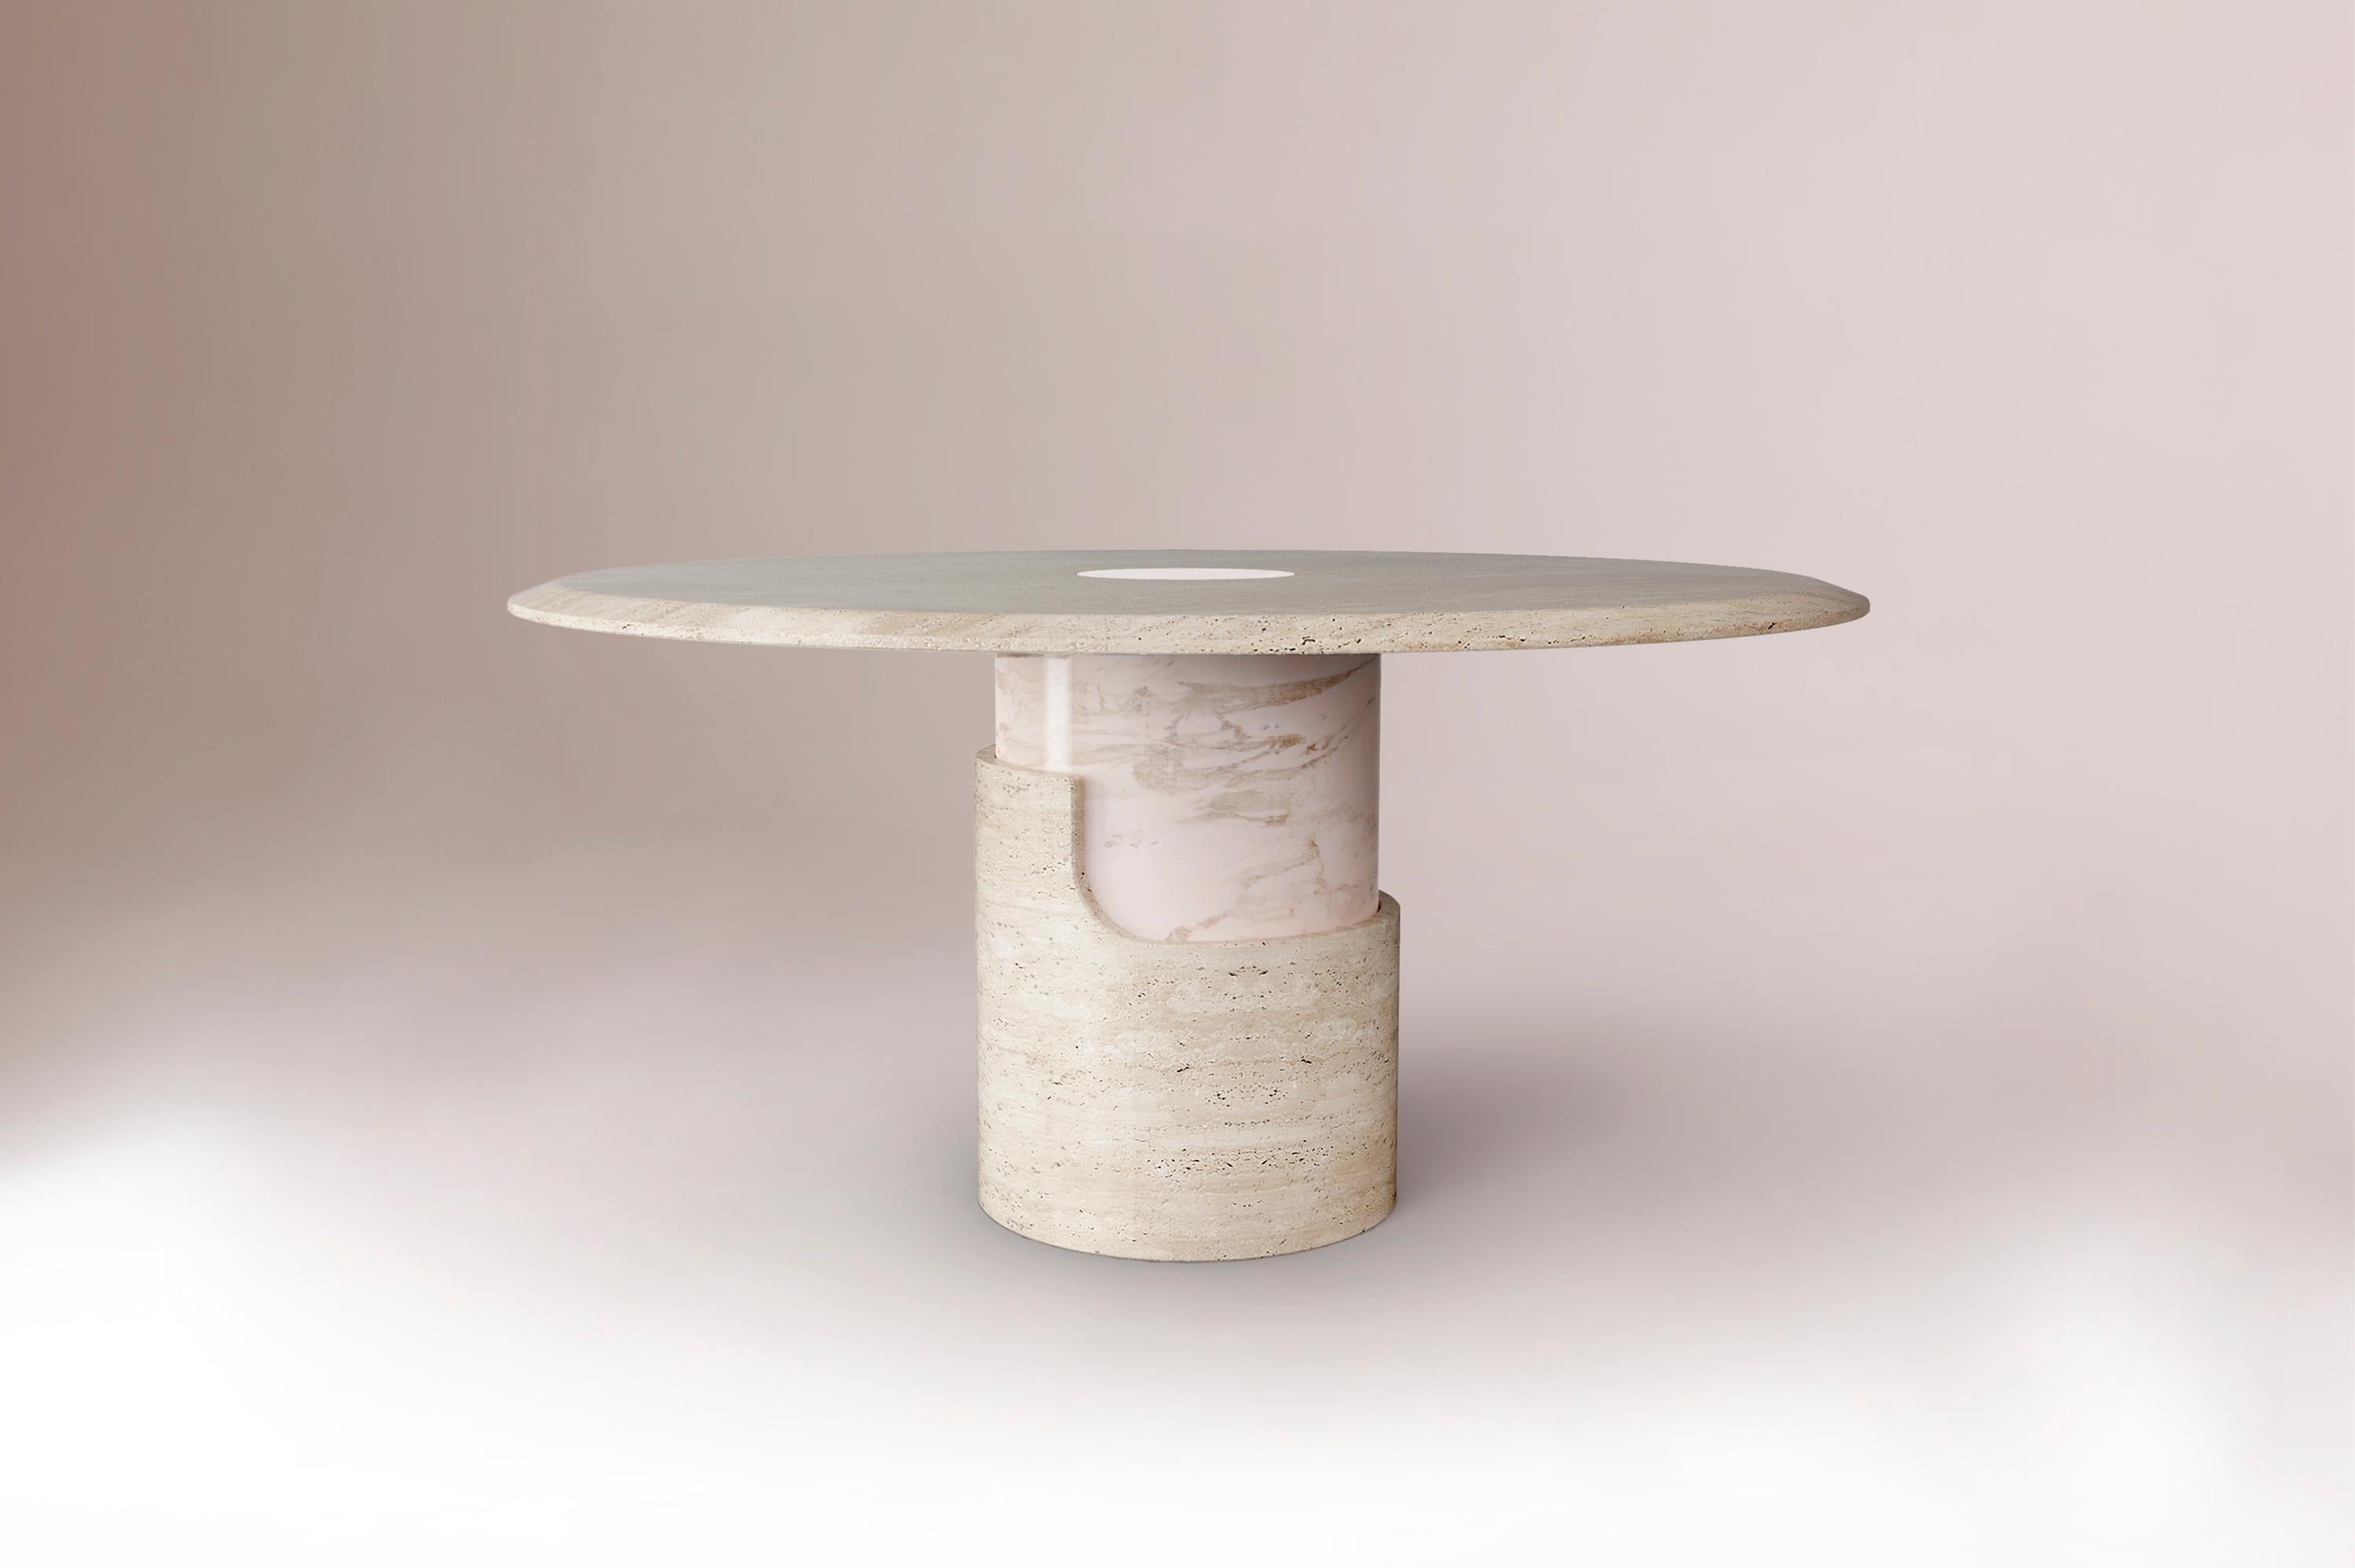 Celebrating a new invented reality, smooth and rough surfaces contrast with one another giving way to a new approach in shape and balance. Braque dinner table shows a torn and fragmented form, exposing the inner core of its base, which can be seen